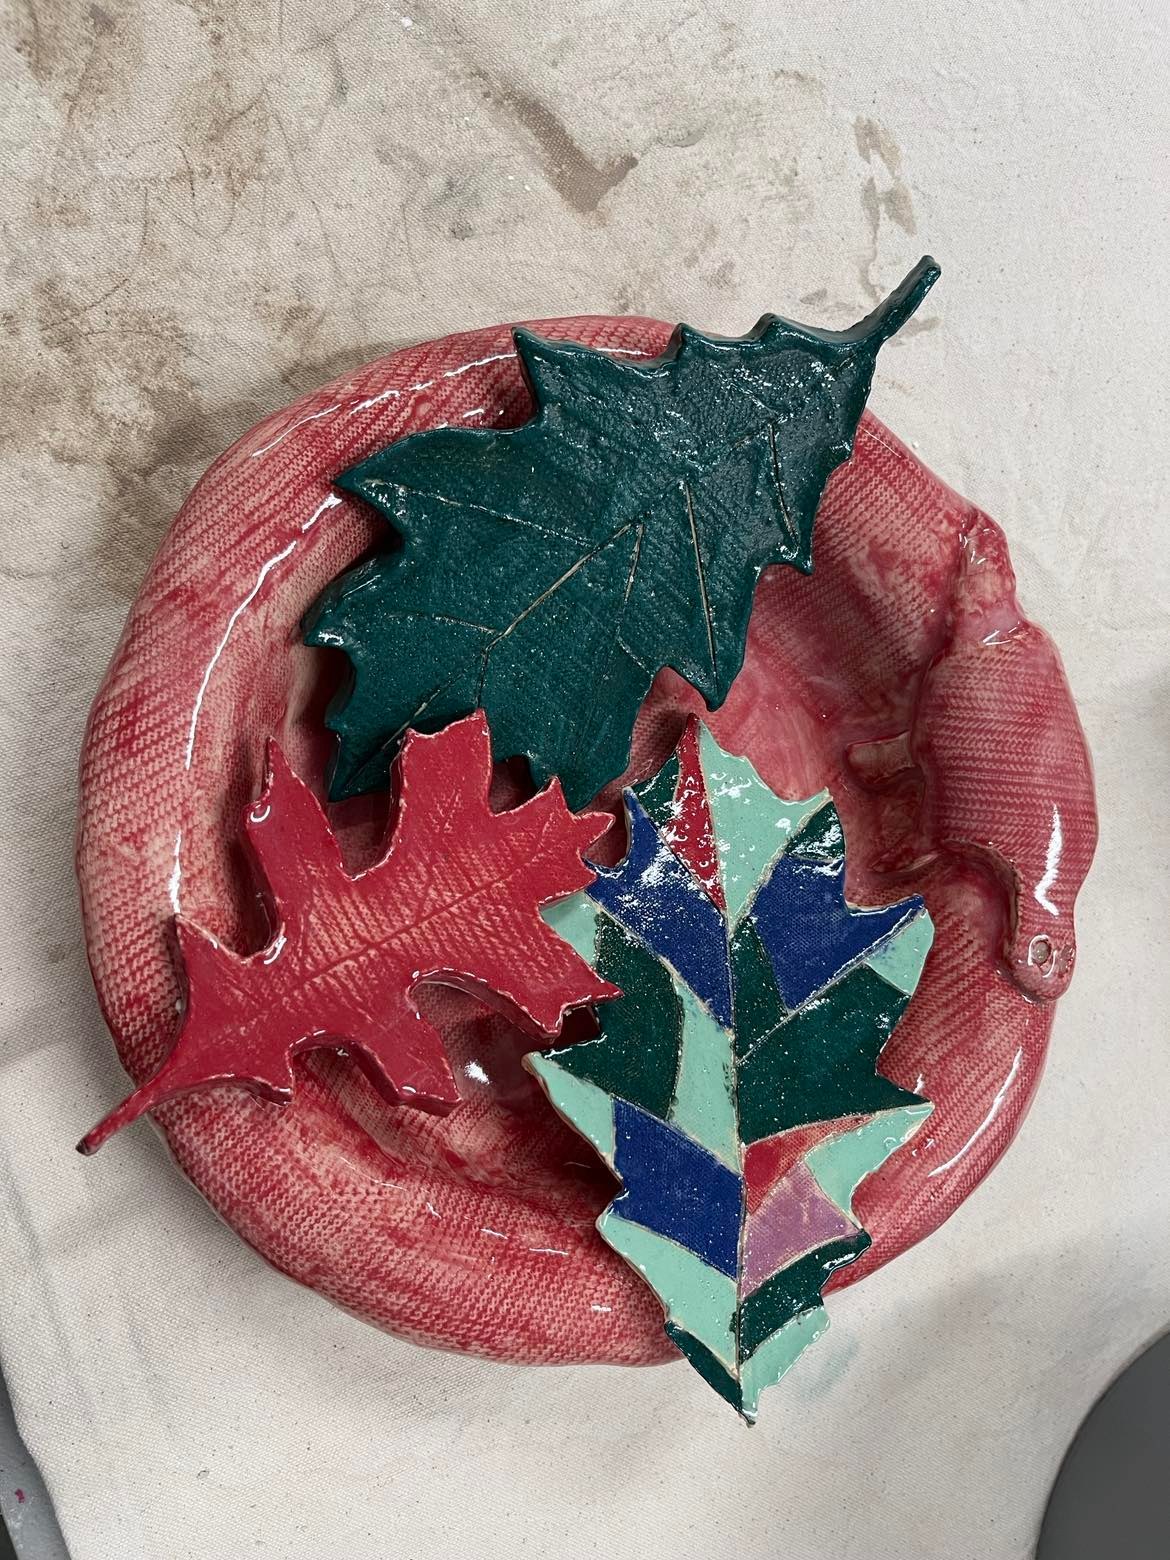 Art in the Garden! Handmade reddish-brown ceramic bowl with three brightly colored clay leaves across the top. Leaves are solid green, solid red, and an artistic patchwork of red, dark blue, dark green, and light blue. It catches rainwater for wildlife to drink.